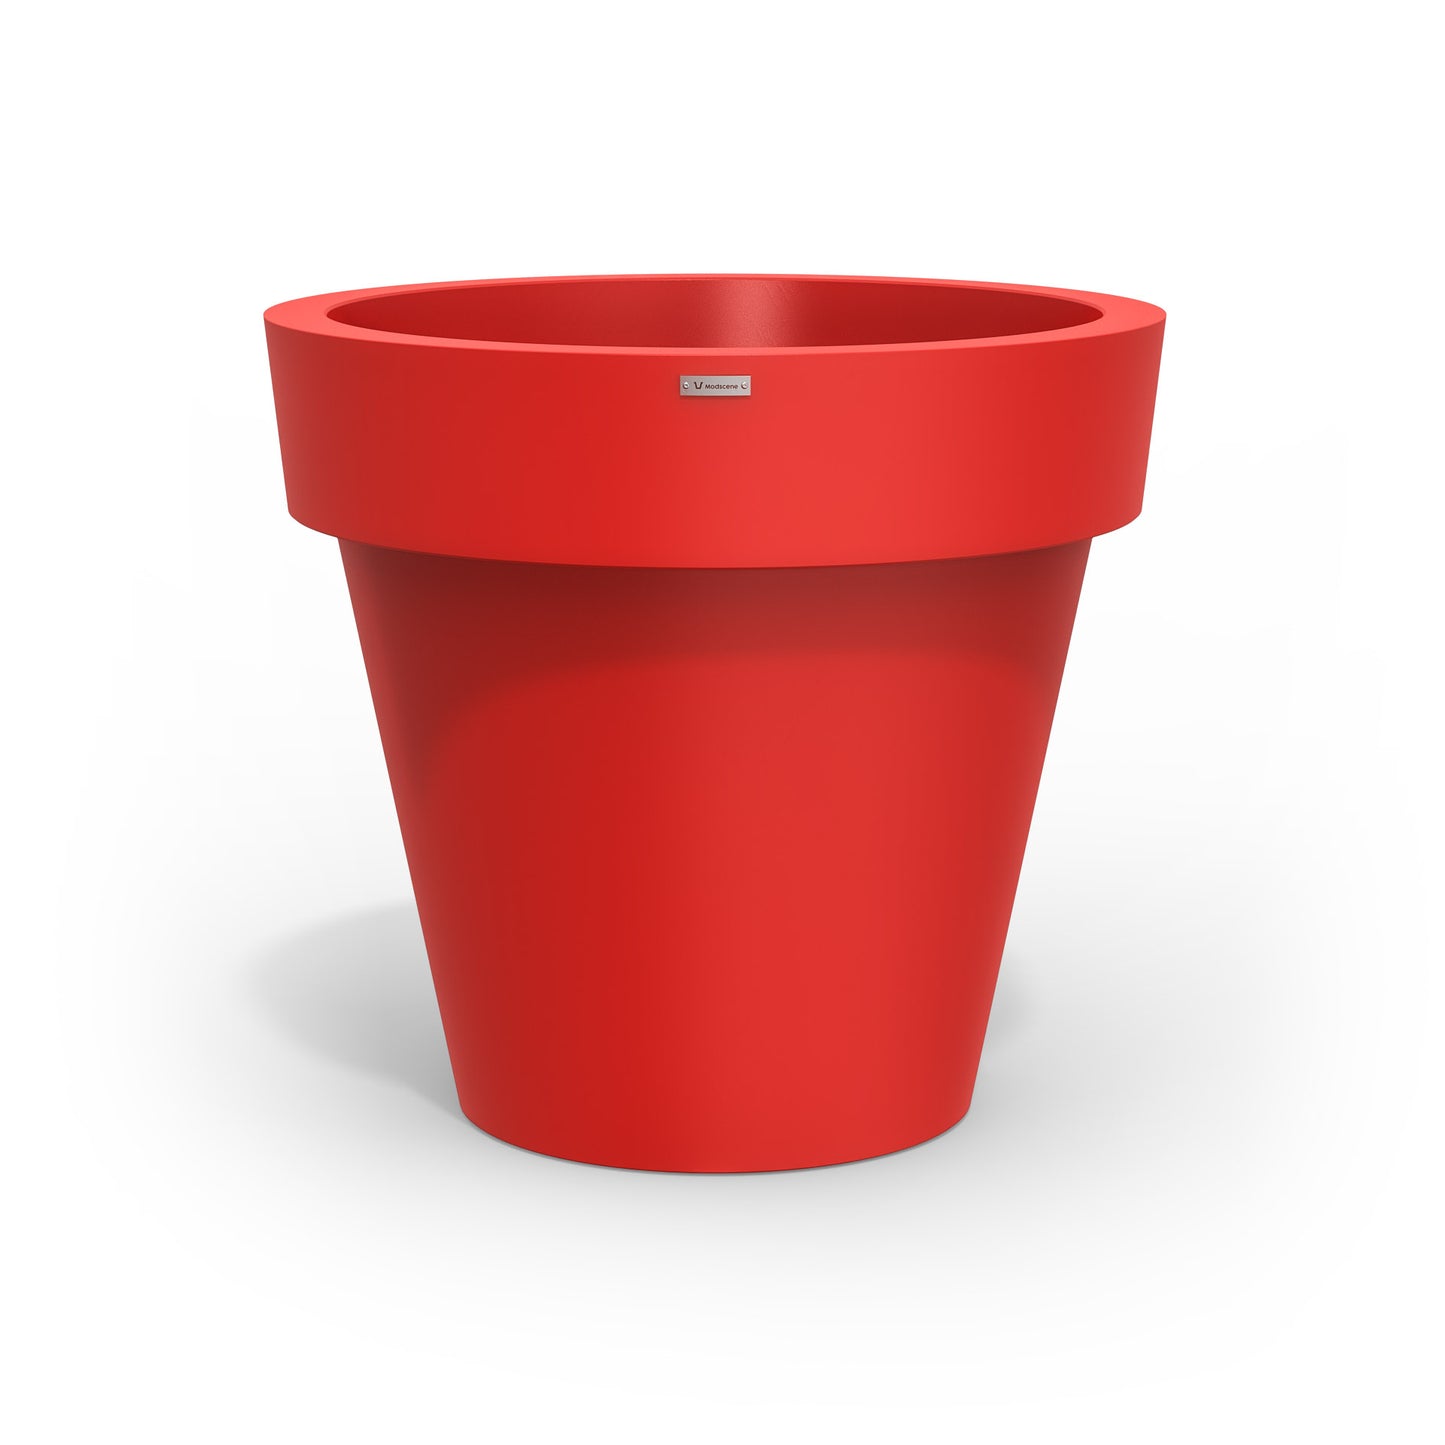 Large Modscene plastic planter pot in a red colour. New Zealand made.